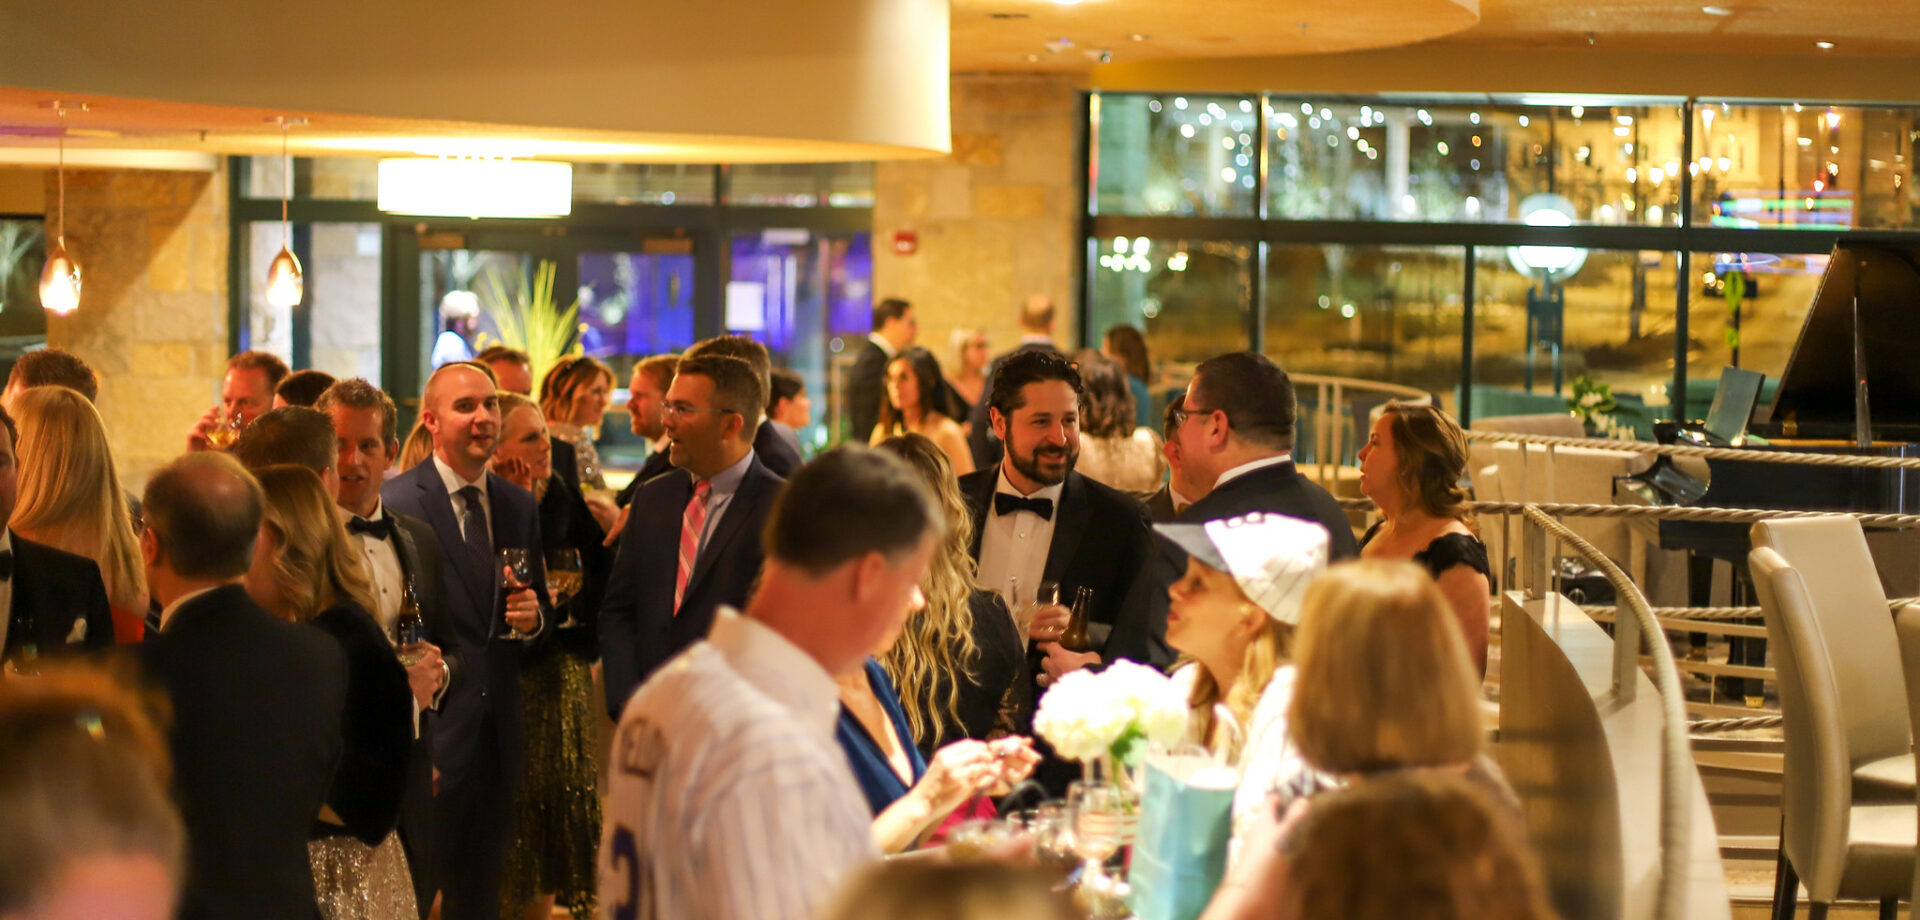 guests mingling at cocktail hour